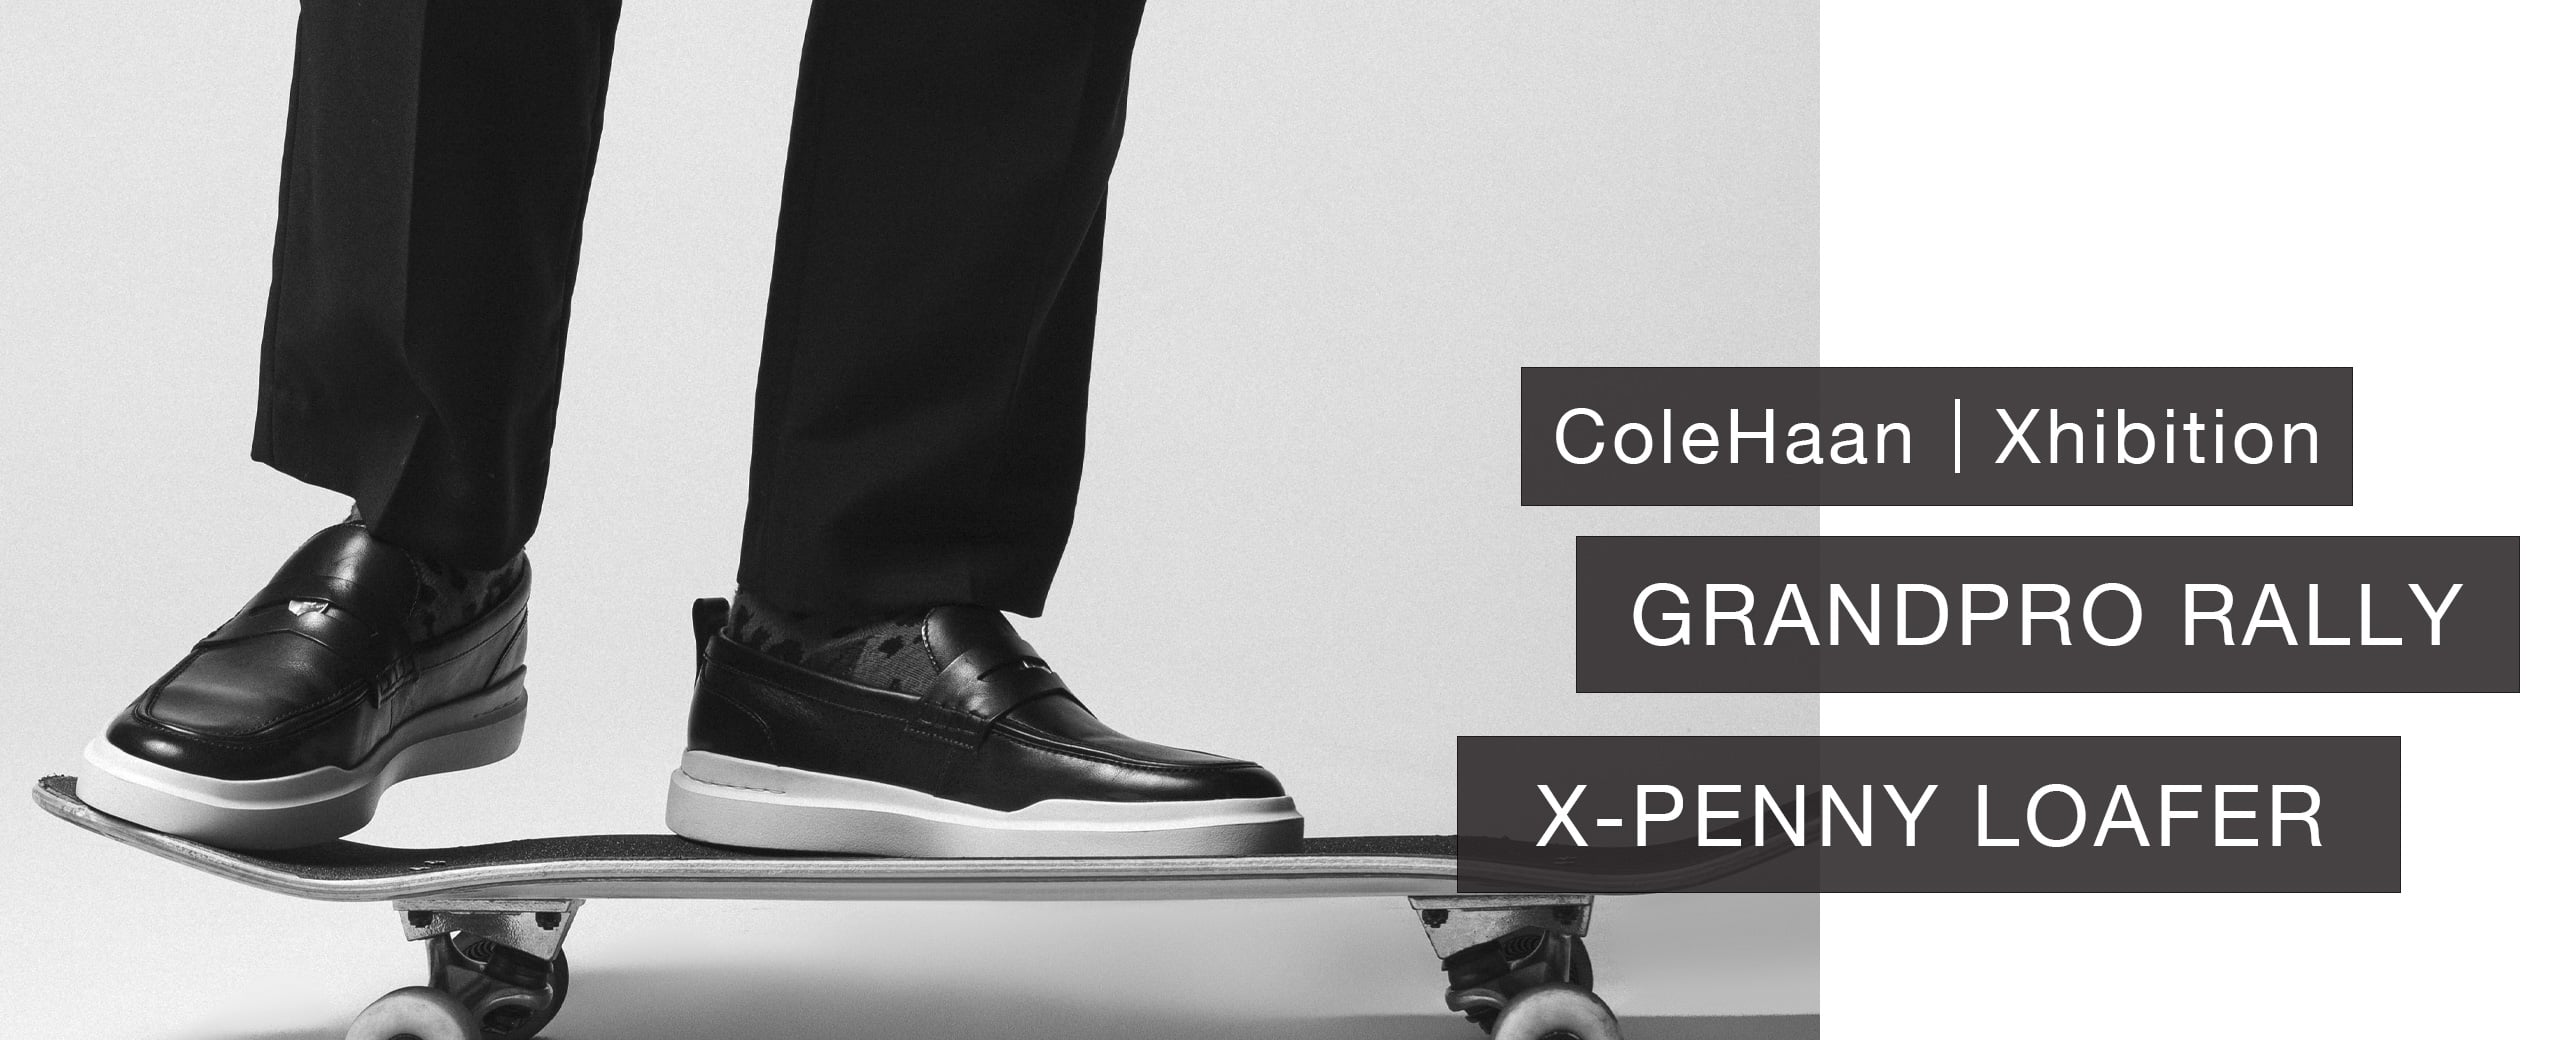 "Cole Haan GRANDPRO RALLY x X-PENNY LOAFER"